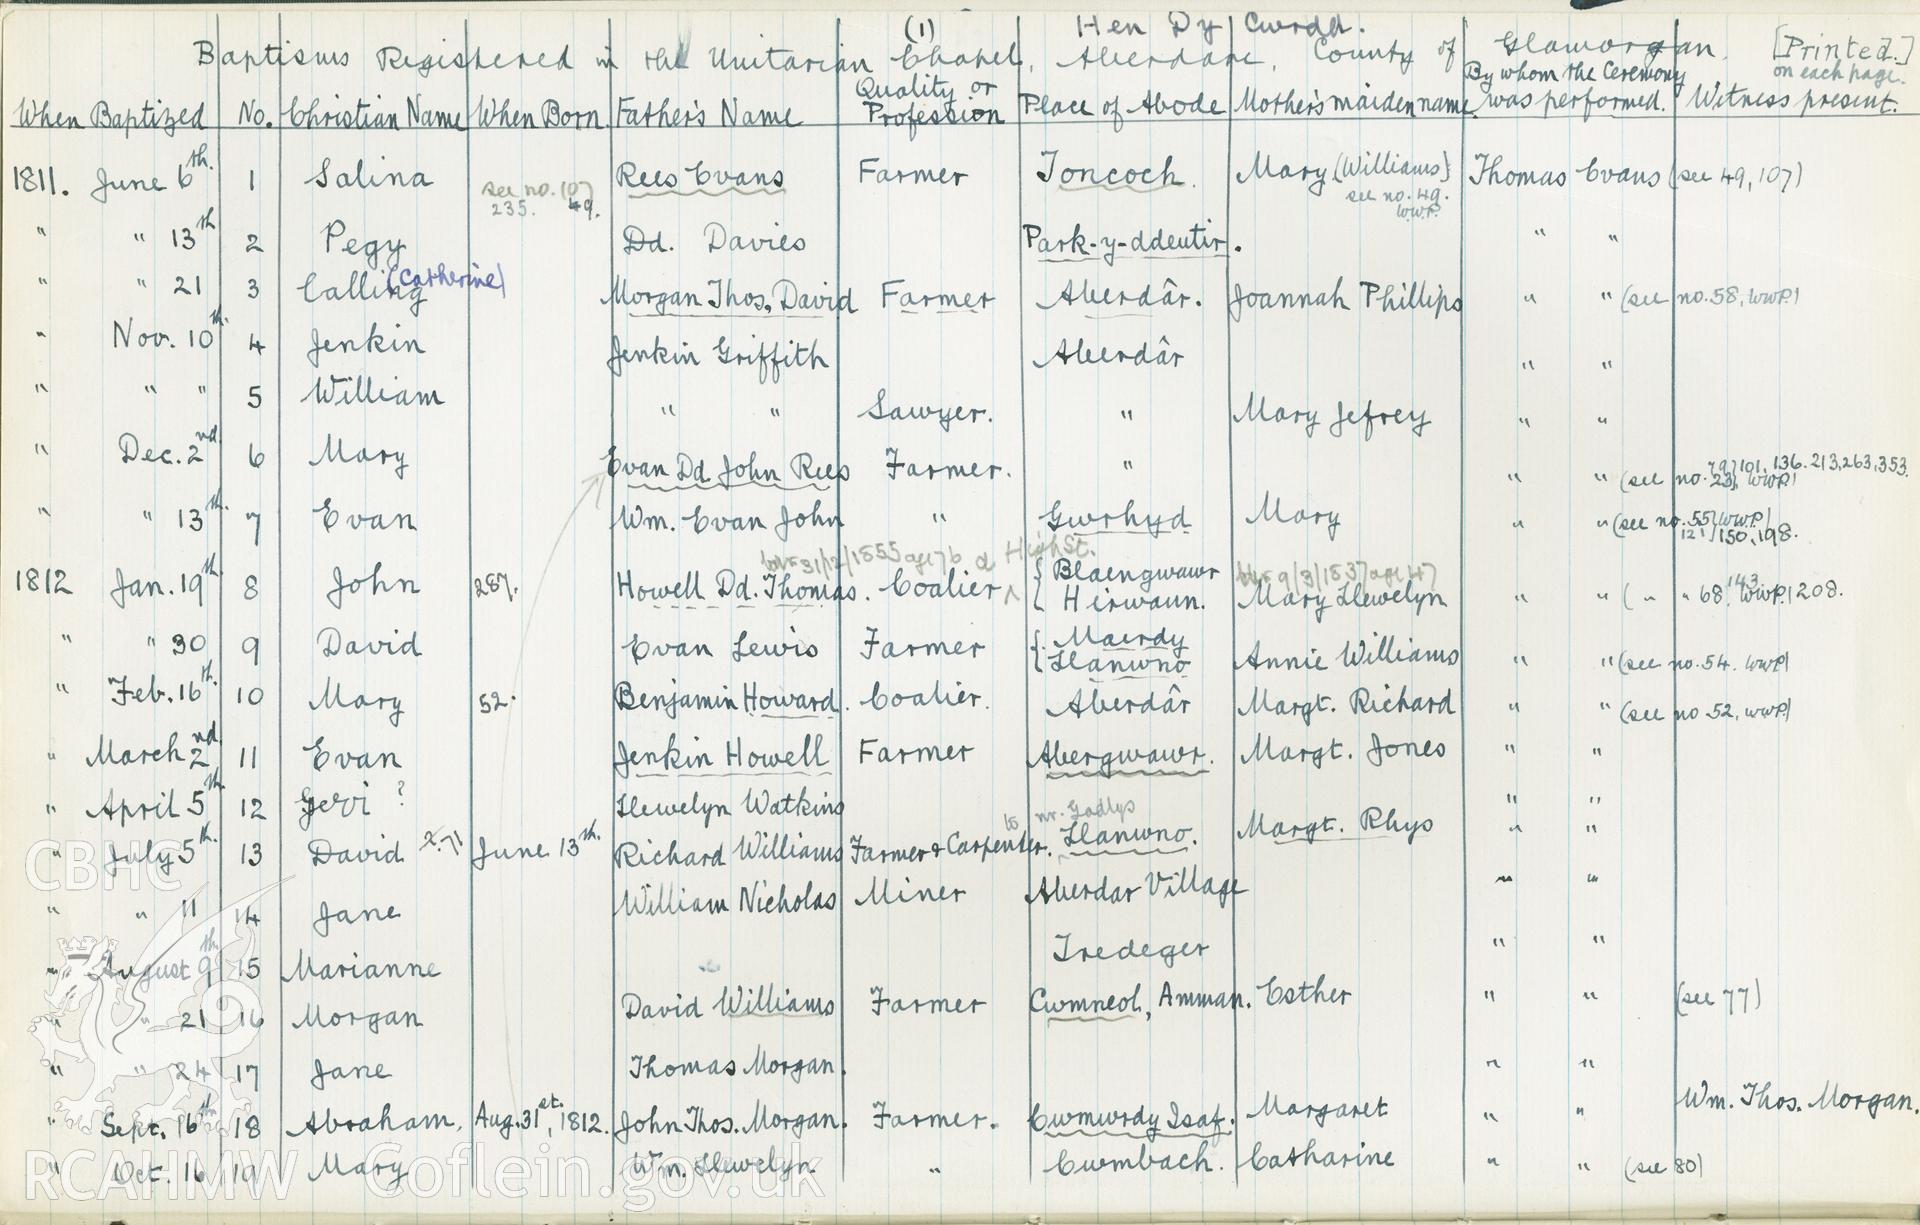 "Baptism Registered" book for Hen Dy Cwrdd, made between April 19th and 28th, 1941, by W. W. Price. Page listing baptisms from 6th June 1811 to 16th October 1811. Donated to the RCAHMW as part of the Digital Dissent Project.